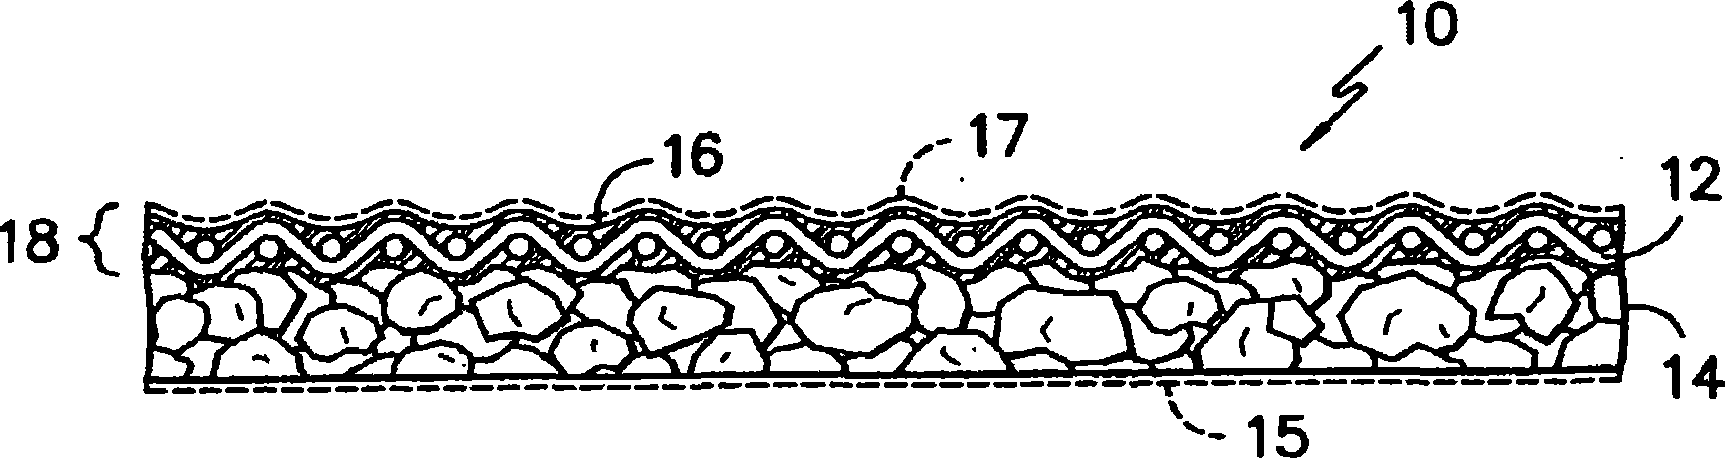 Surface coverings and methods